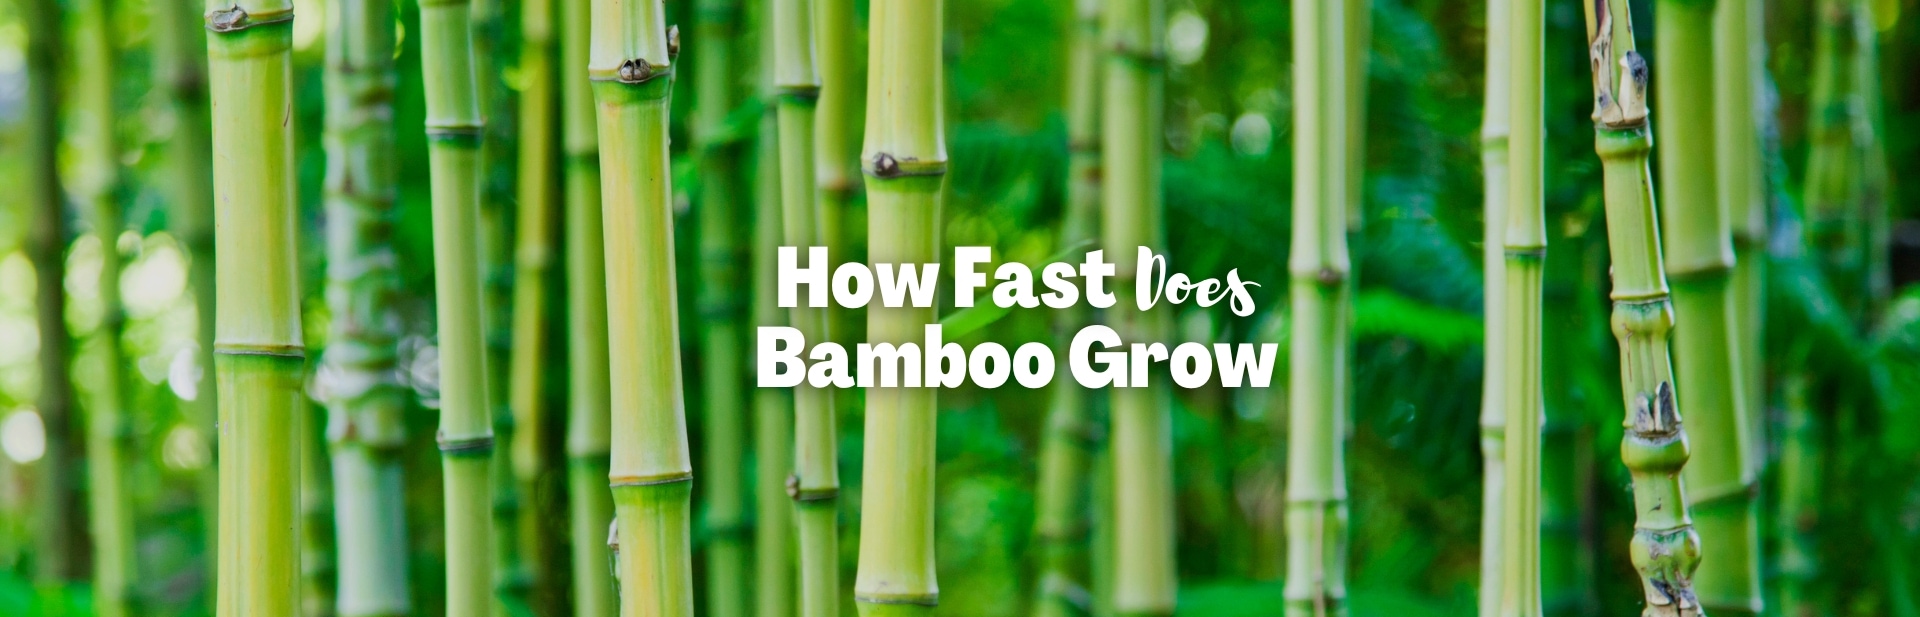 Plant Speed Records: How Fast Does Bamboo Grow?